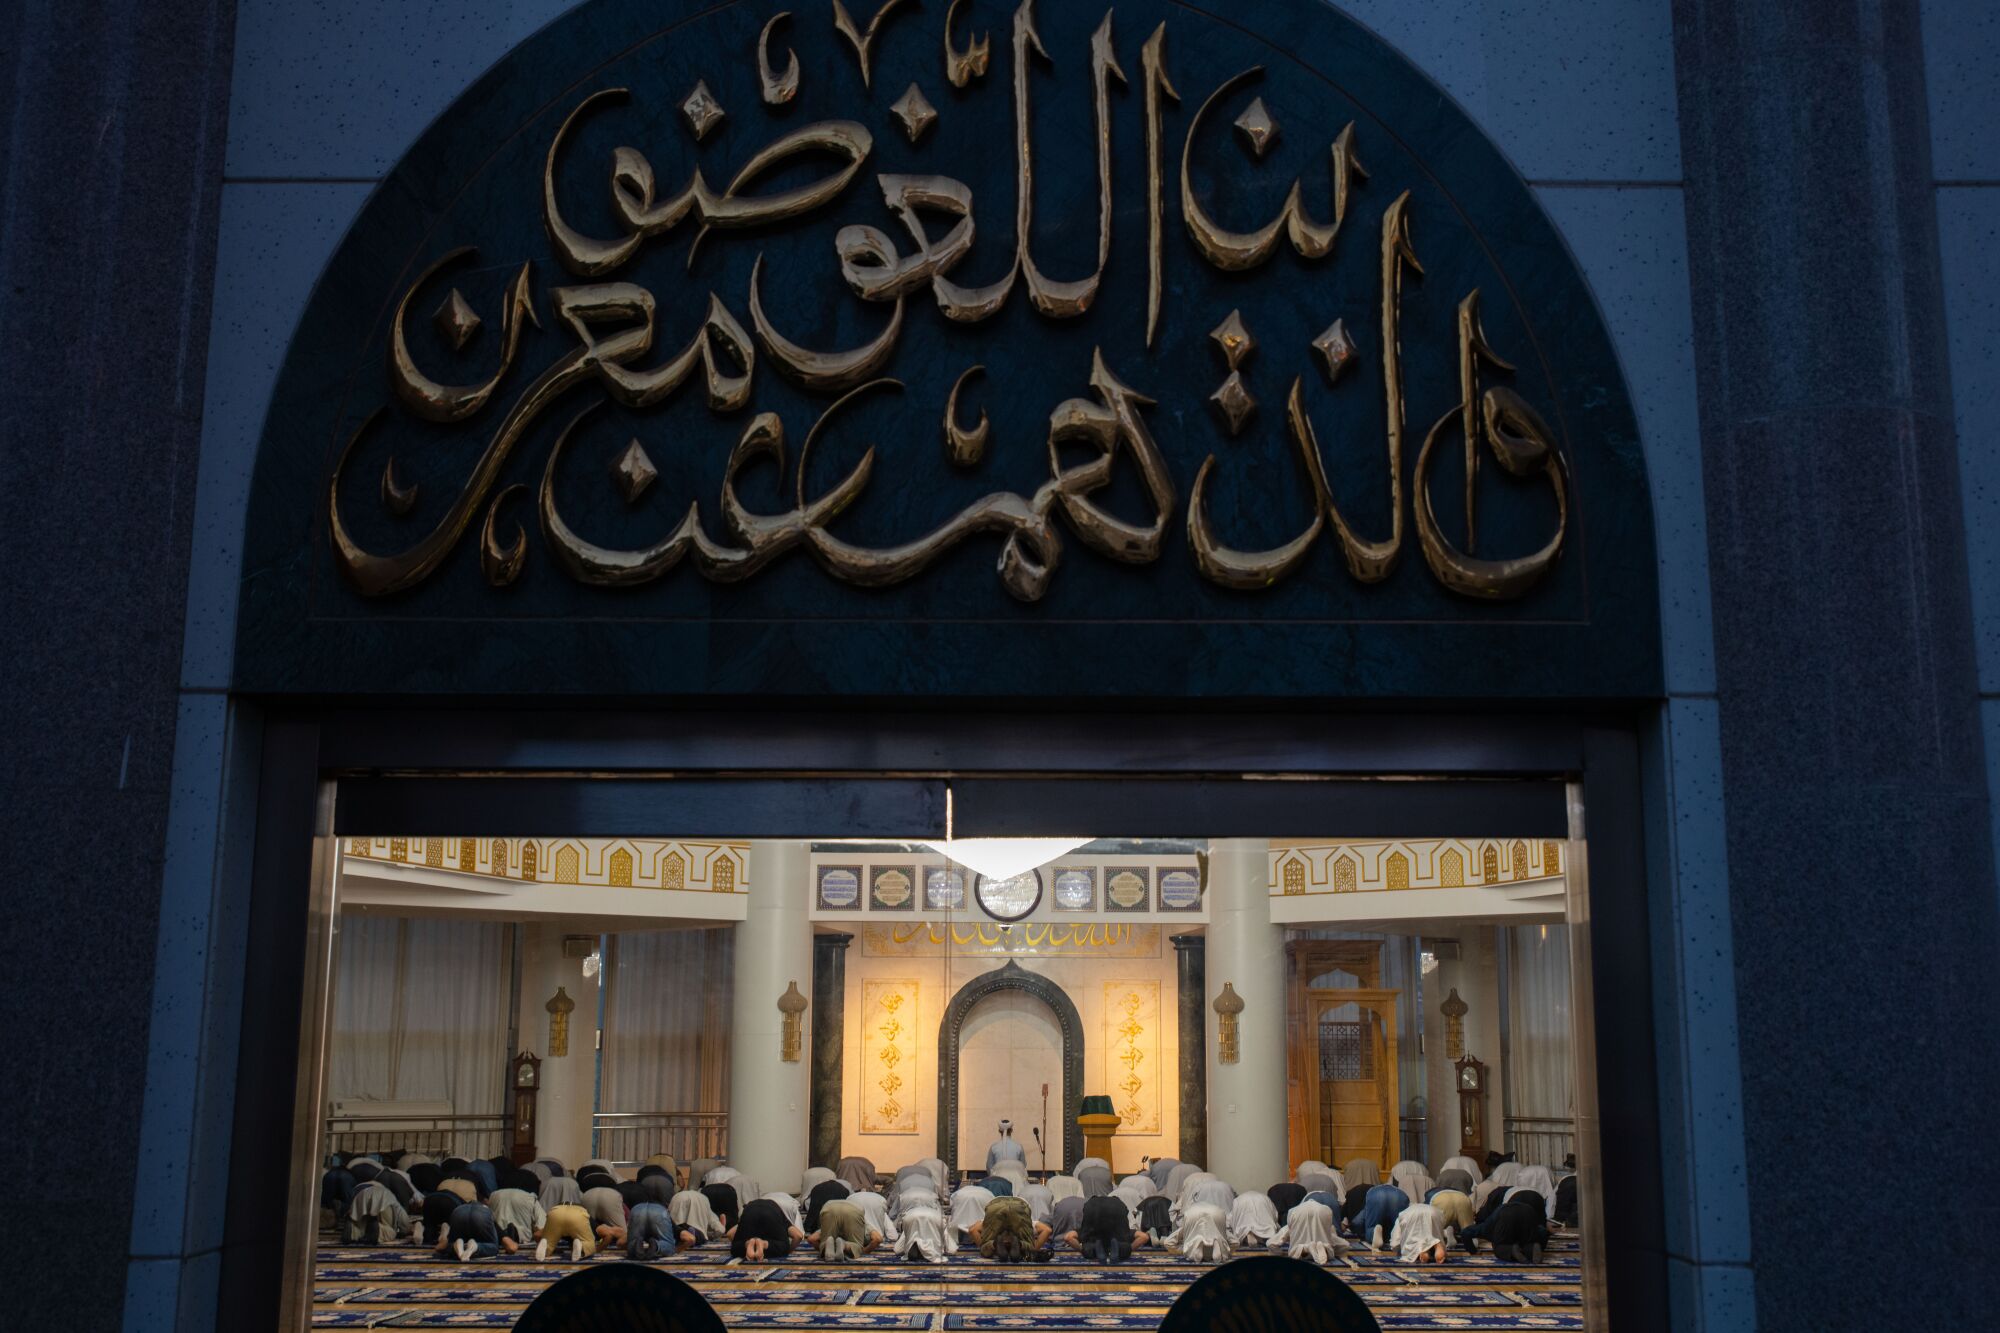 A view of people kneeling in prayer beyond an entryway, above which hangs a sign in blue with golden script in Arabic 